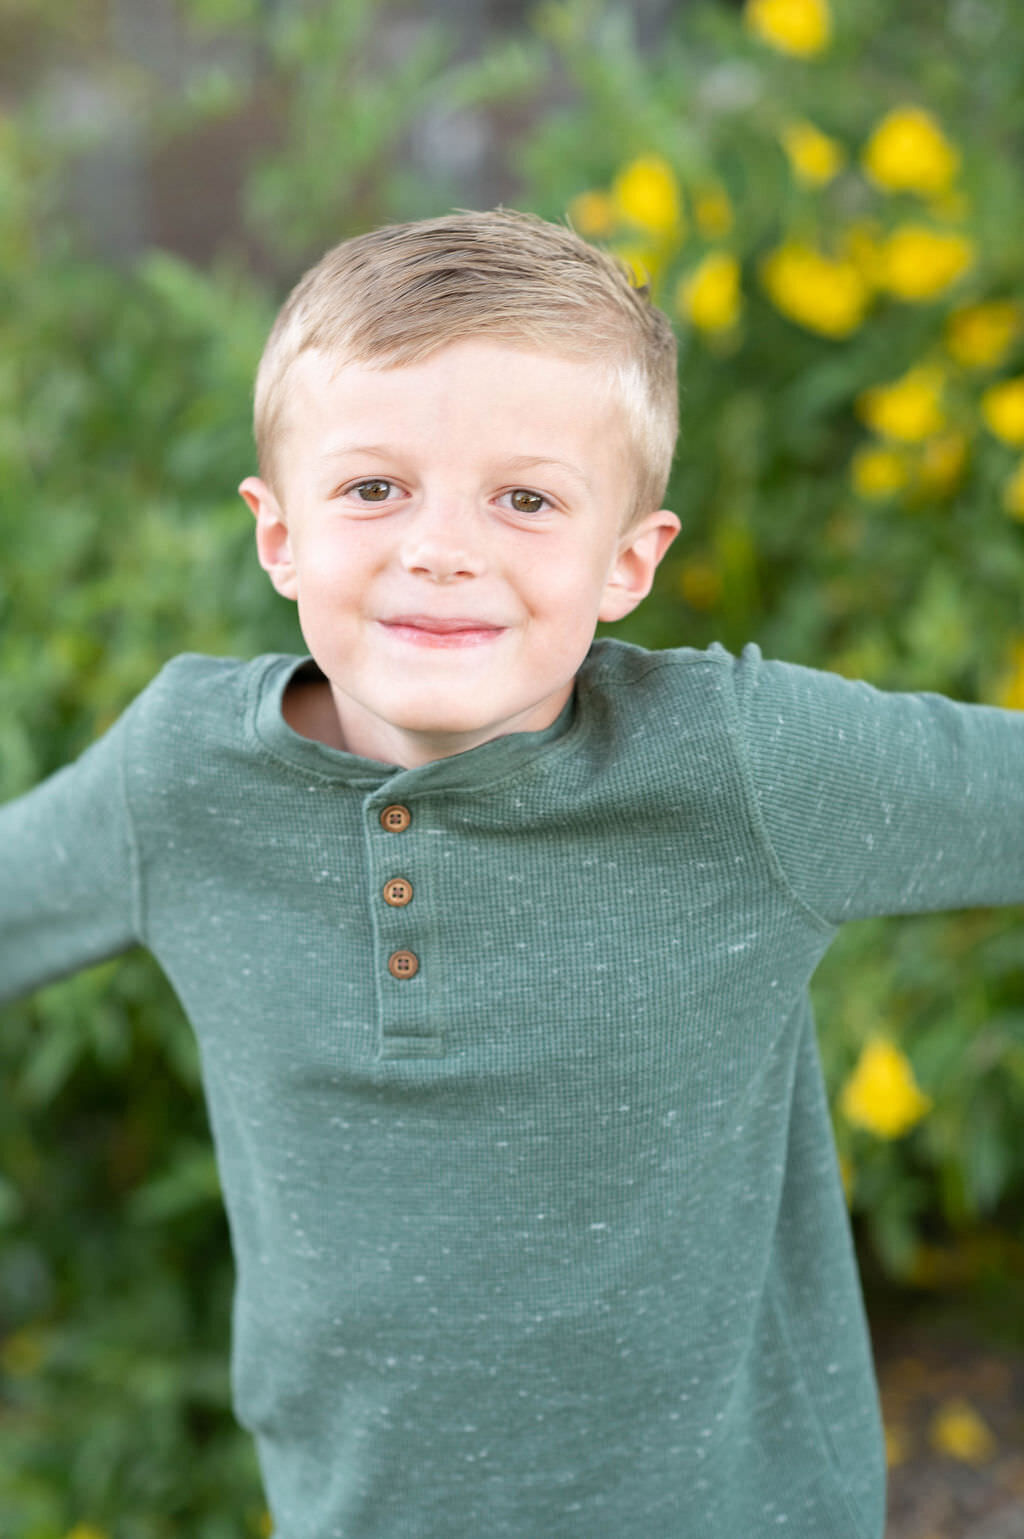 A boy with his arms out smiling.